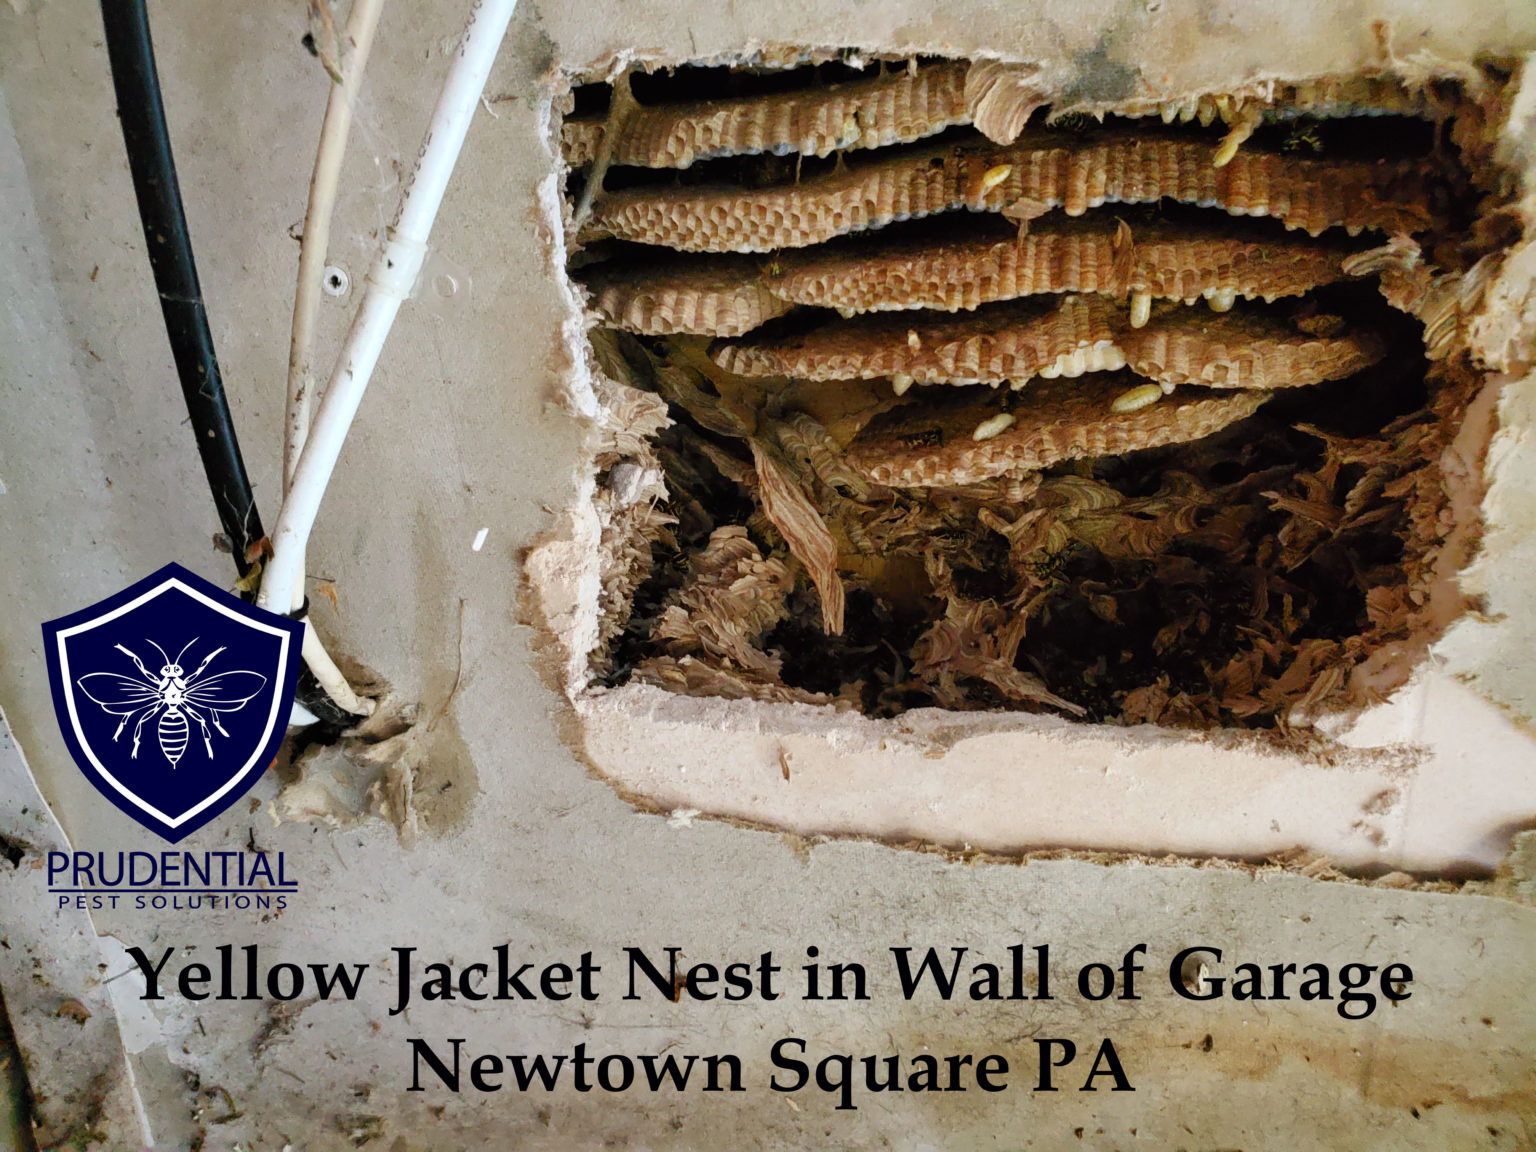 Yellow Jacket Nest in Wall of Garage - Prudential Pest Solutions